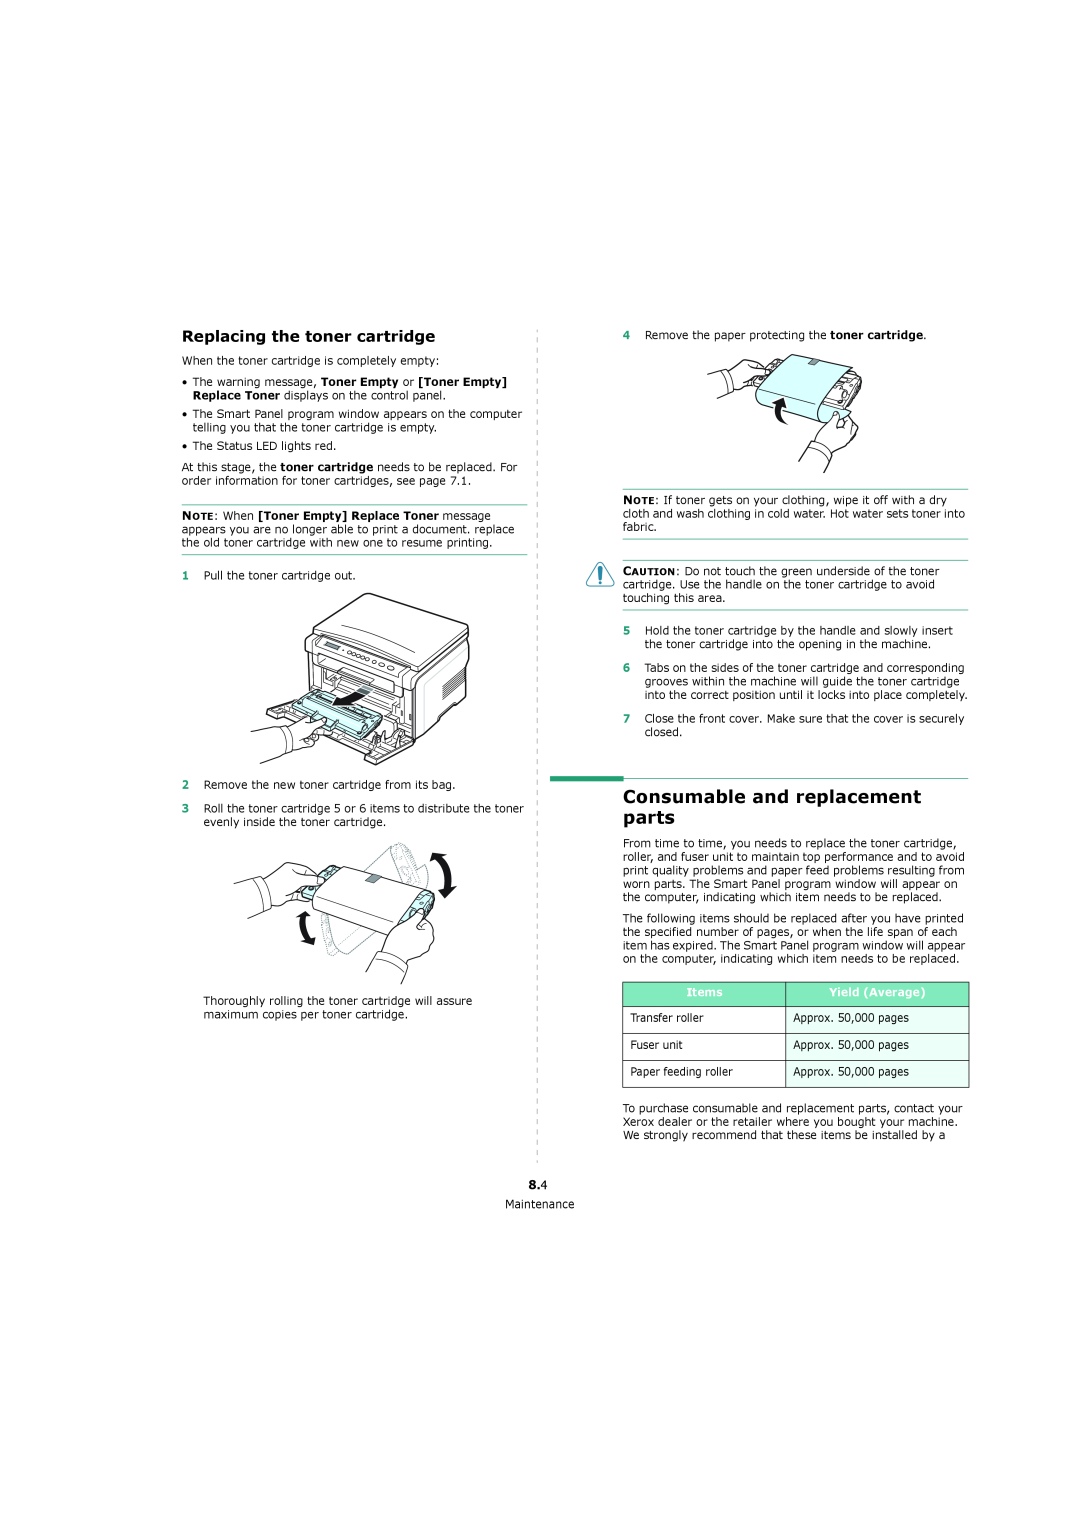 Xerox 3119 manual Consumable and replacement parts, Replacing the toner cartridge 